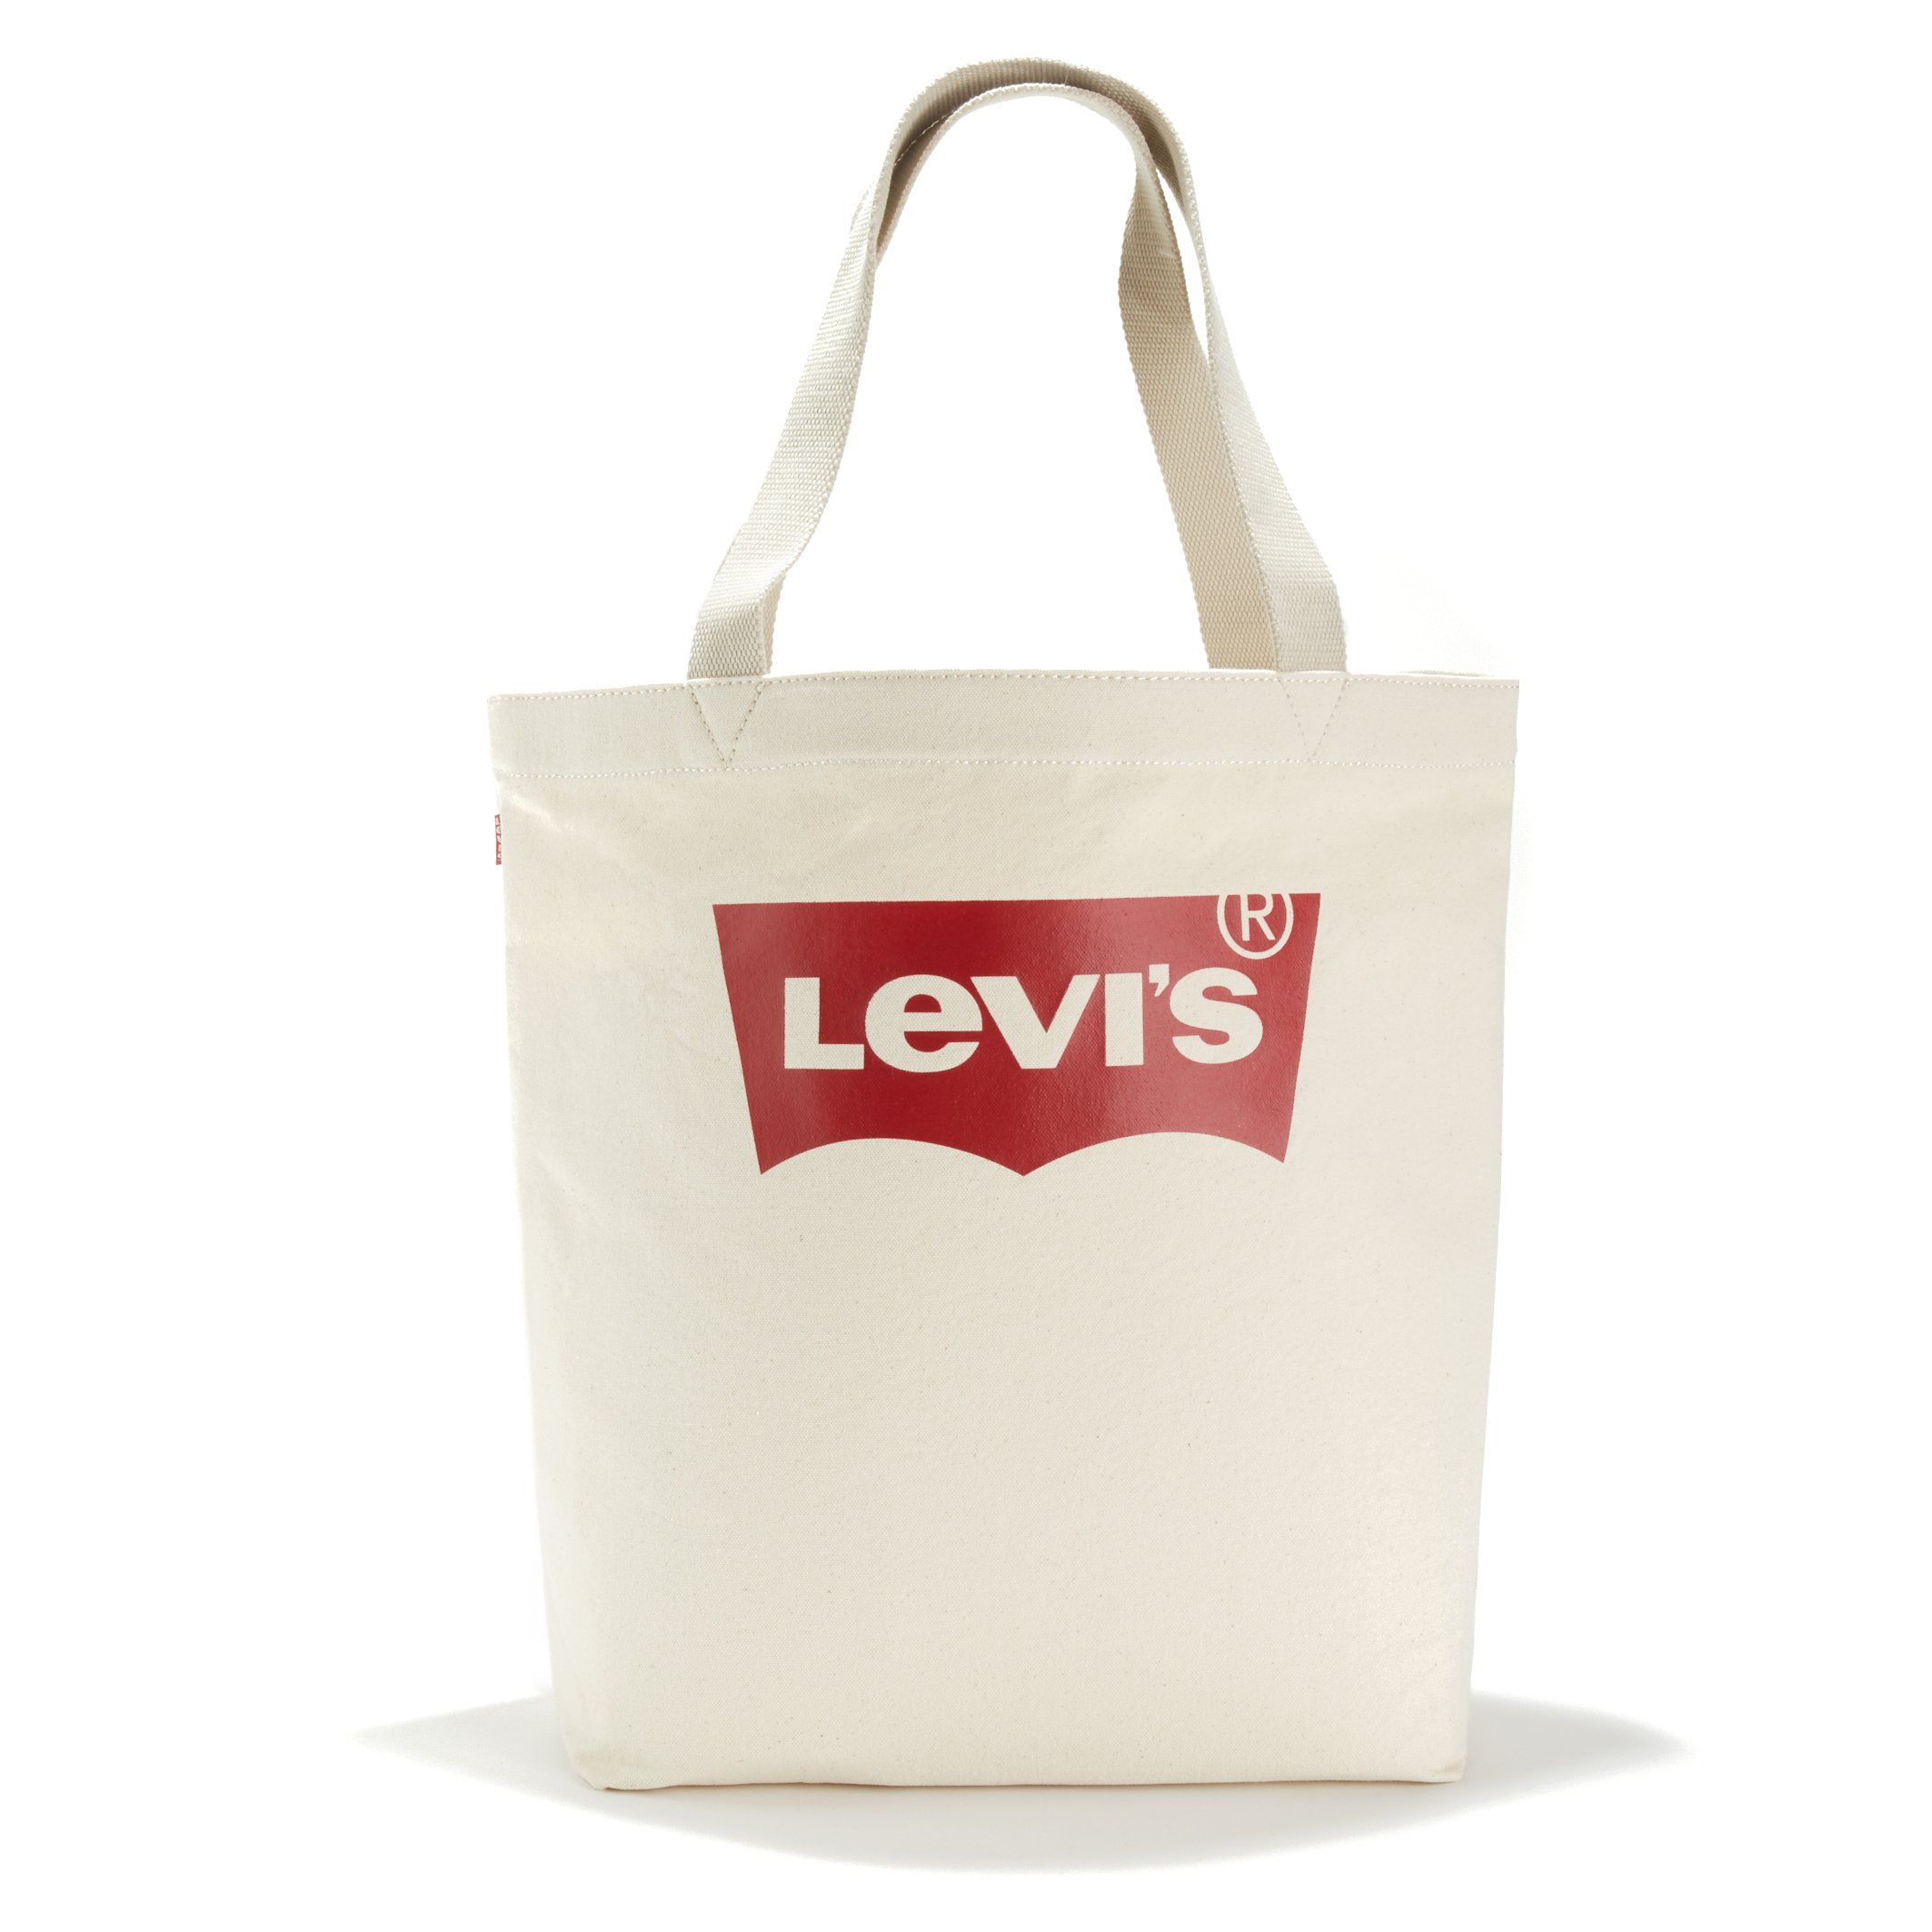 omverwerping Gladys Overgave Tas in stof batwing tote w beige Levi's | La Redoute